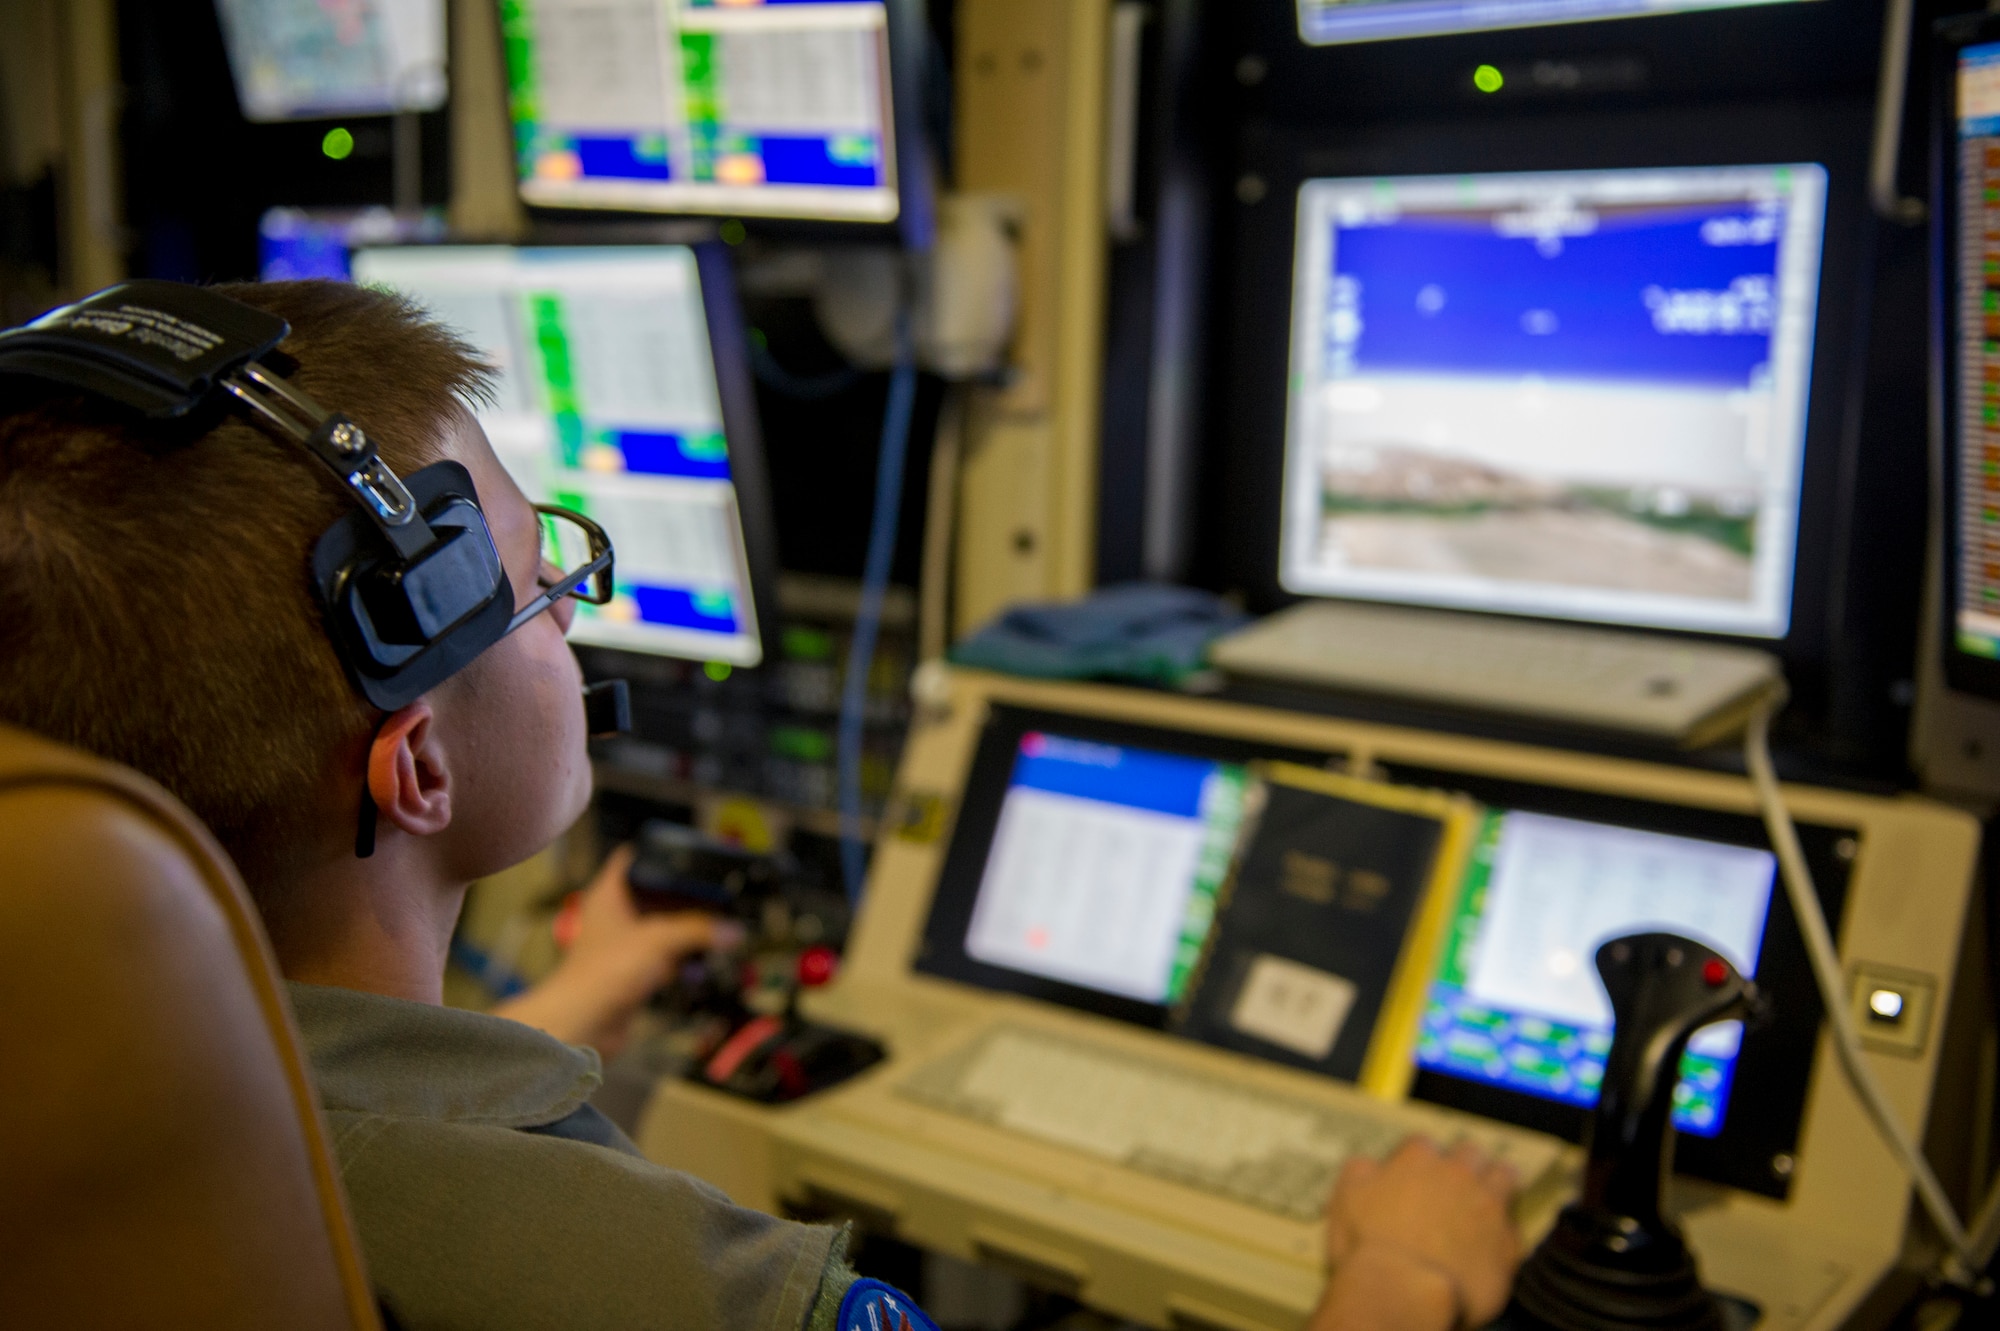 The 49th Wing at Holloman Air Force Base, N.M., is the premiere MQ-9 Reaper and F-16 Viper training installation in the Air Force. The 49th Wing will realign from Air Combat Command to Air Education and Training Command effective Oct. 1, 2018, allowing more efficiency in its formal training units. (U.S. Air Force photo by Senior Airman BreeAnn Sachs)